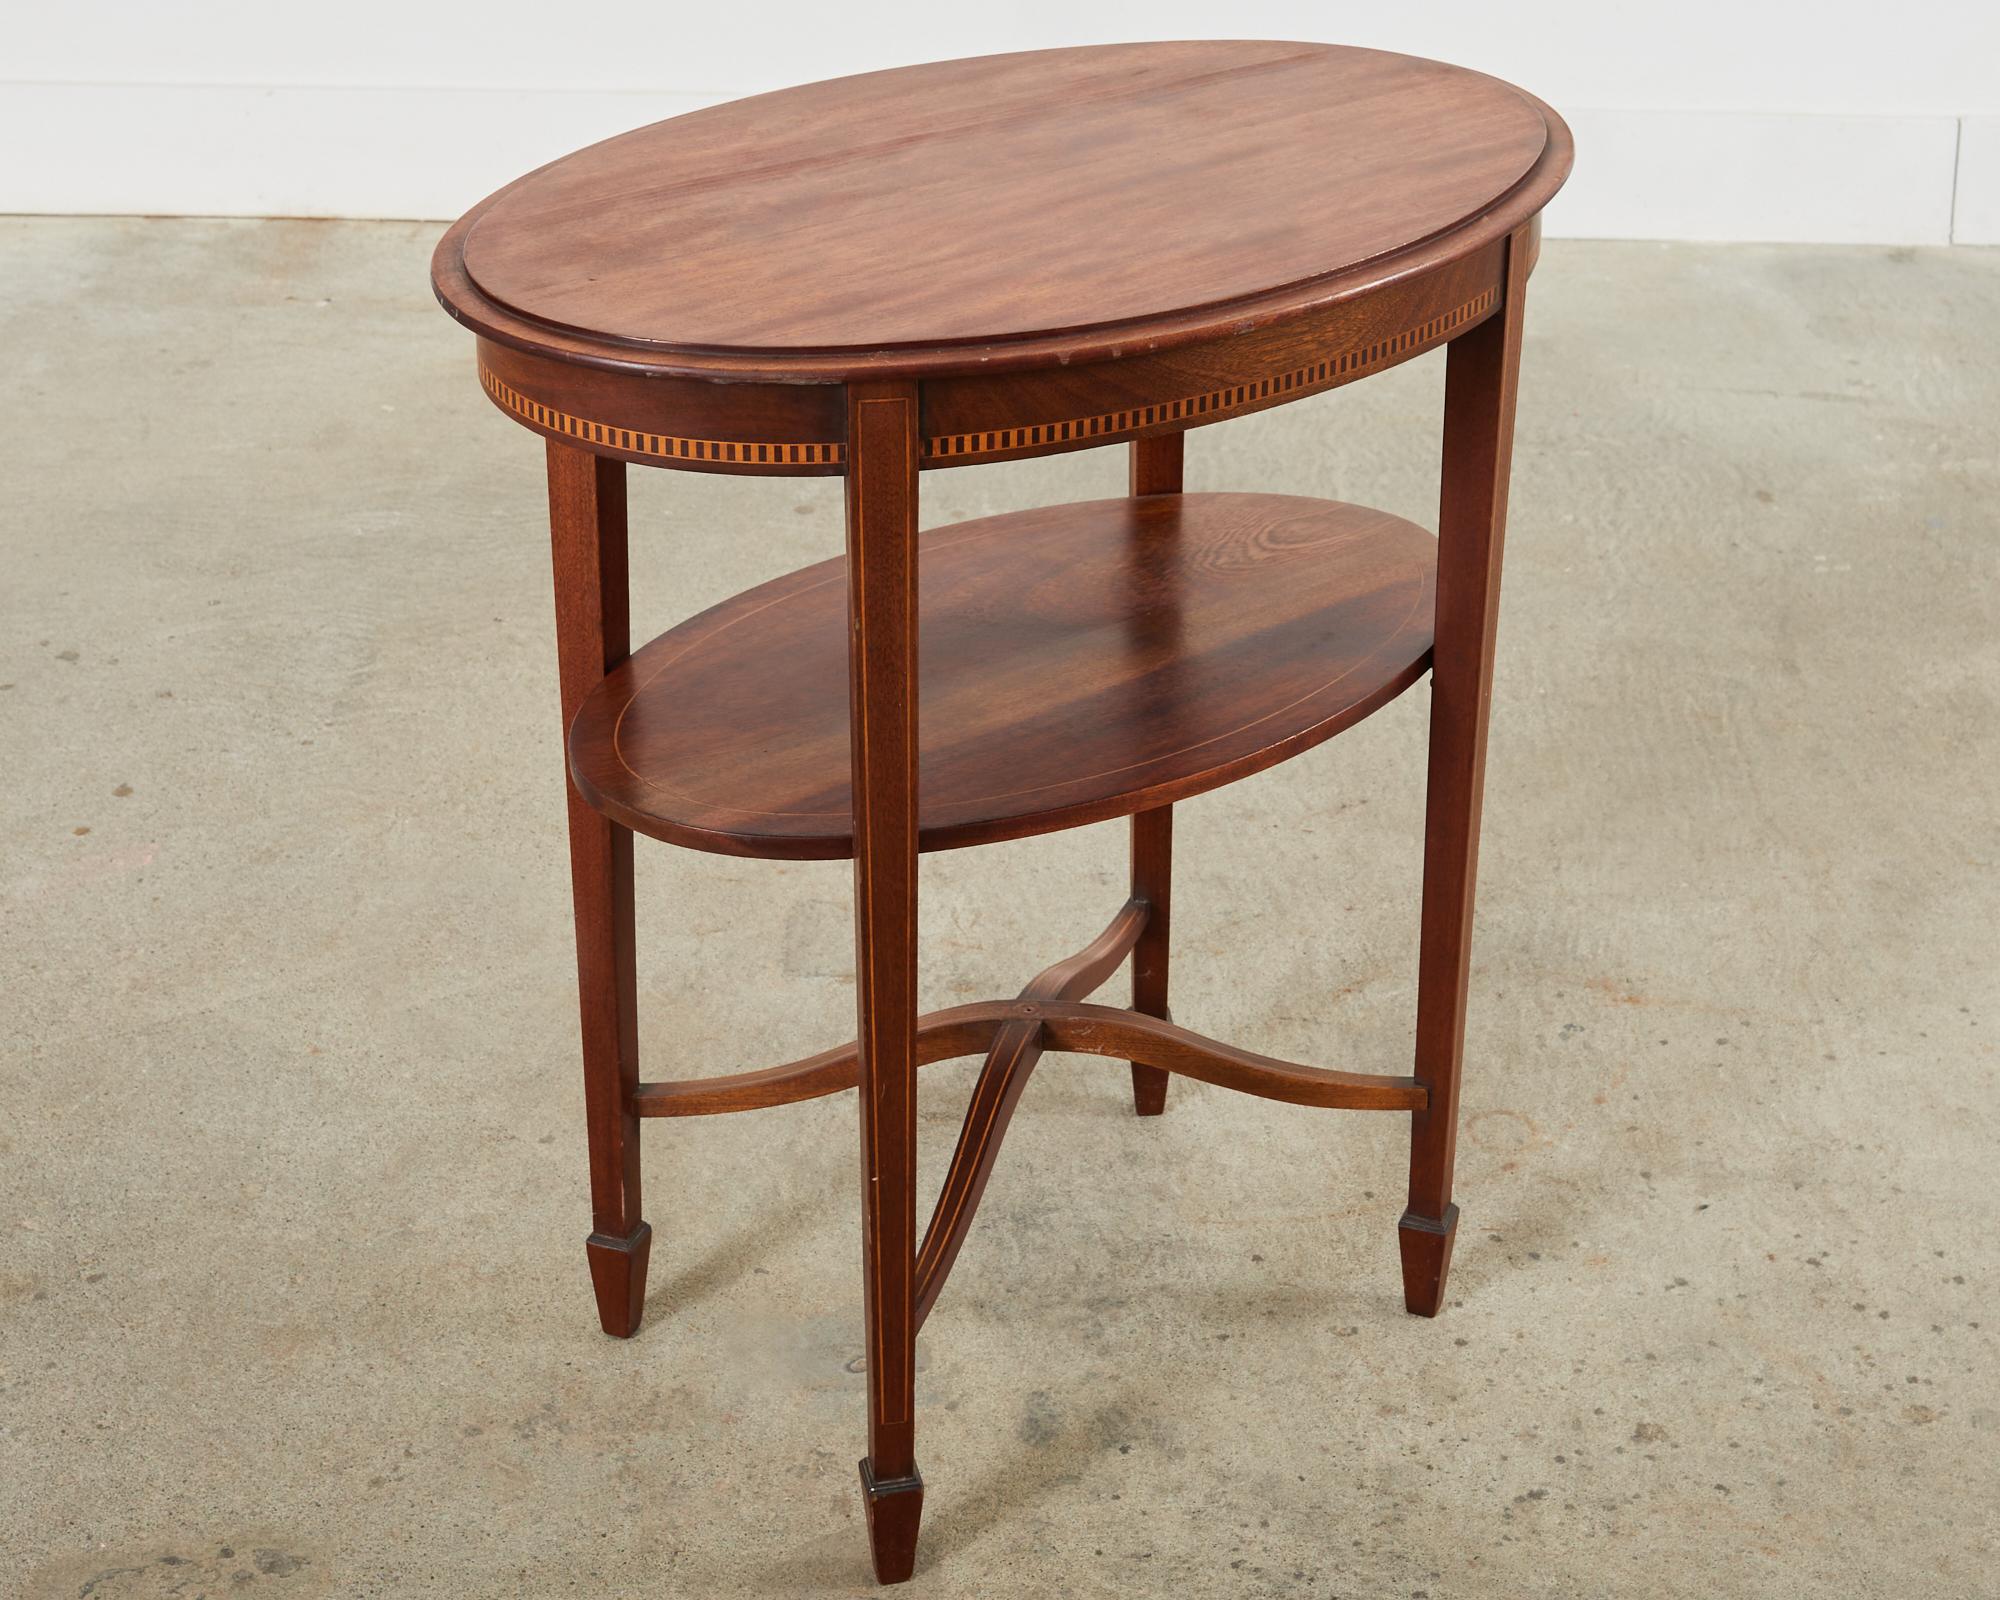 English Mahogany Two-Tier Side Table with Inlay In Good Condition For Sale In Rio Vista, CA